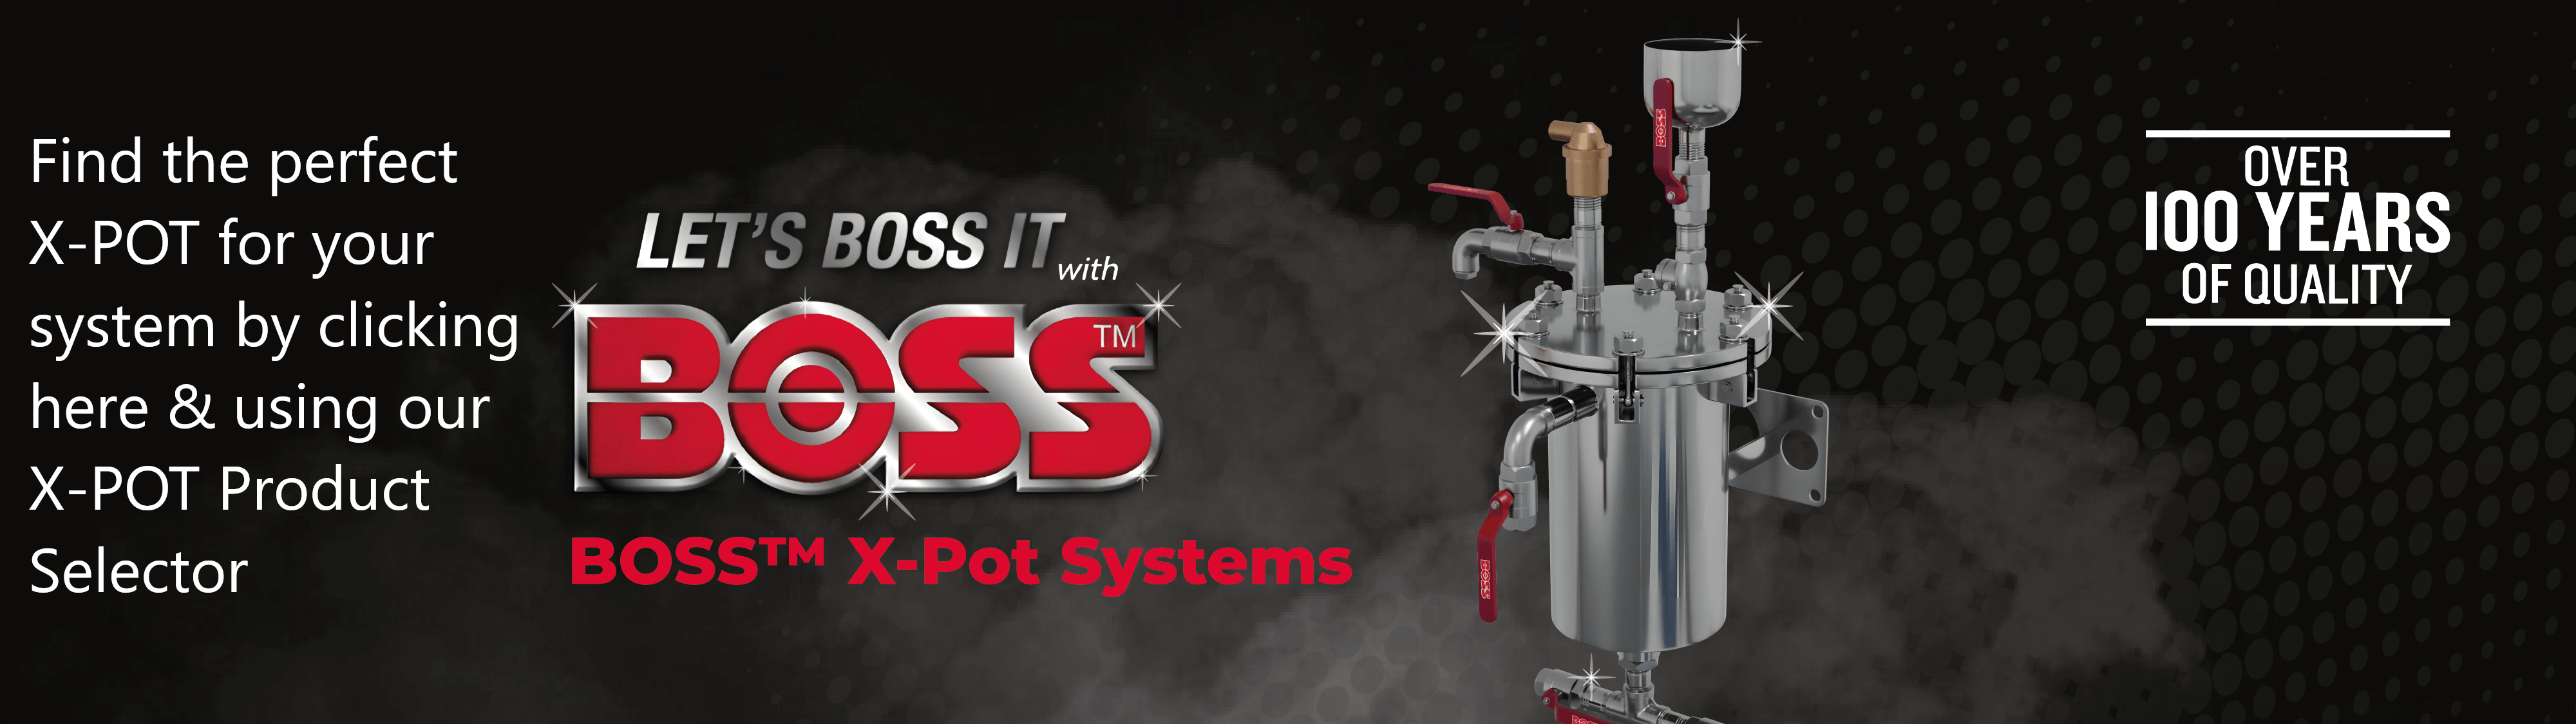 Find the perfect X-POT for your system using our X-POT Product Selector